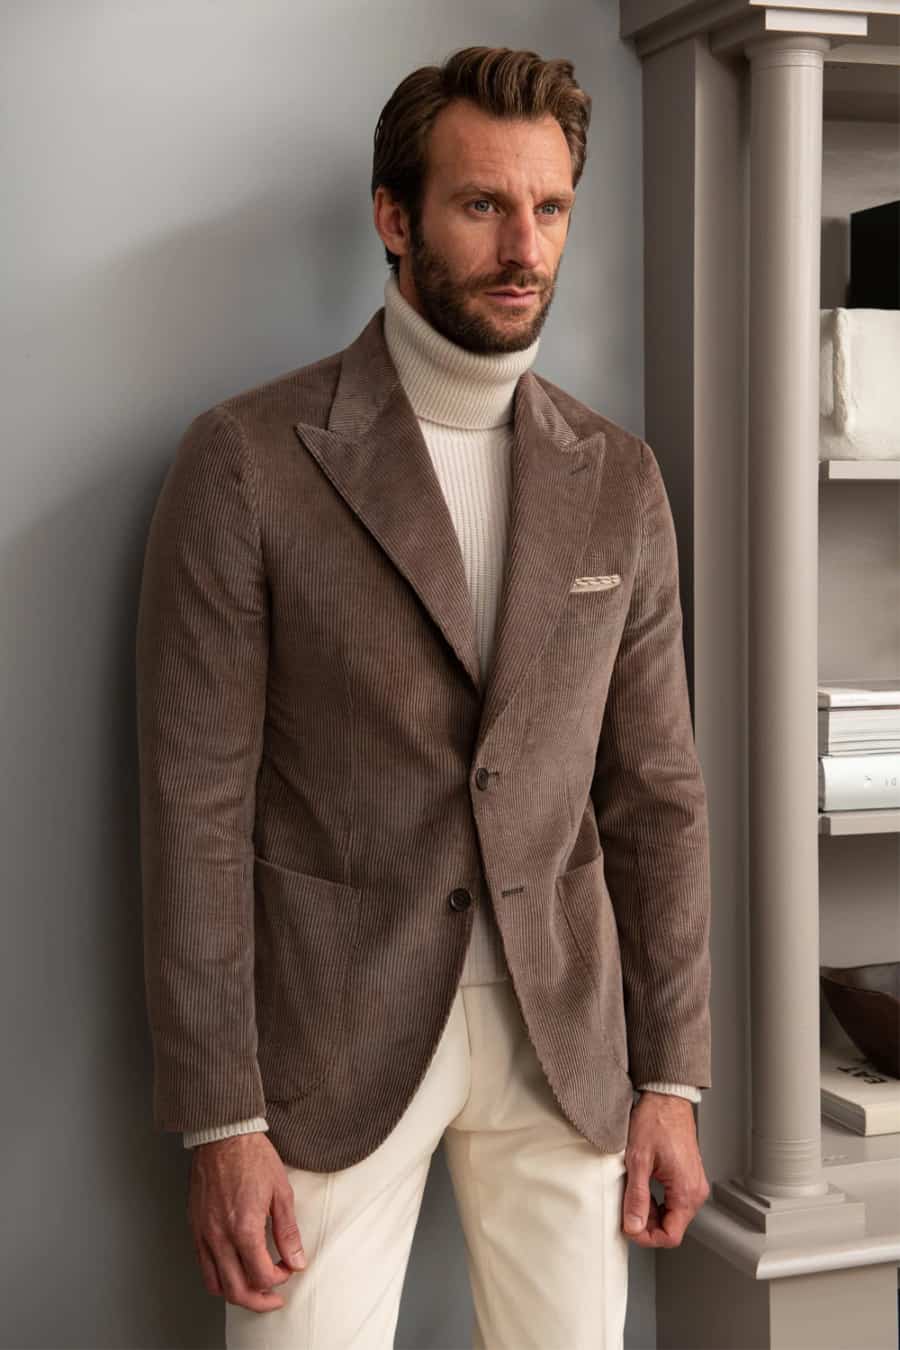 Men's corduroy blazer, roll neck and cream trousers outfit